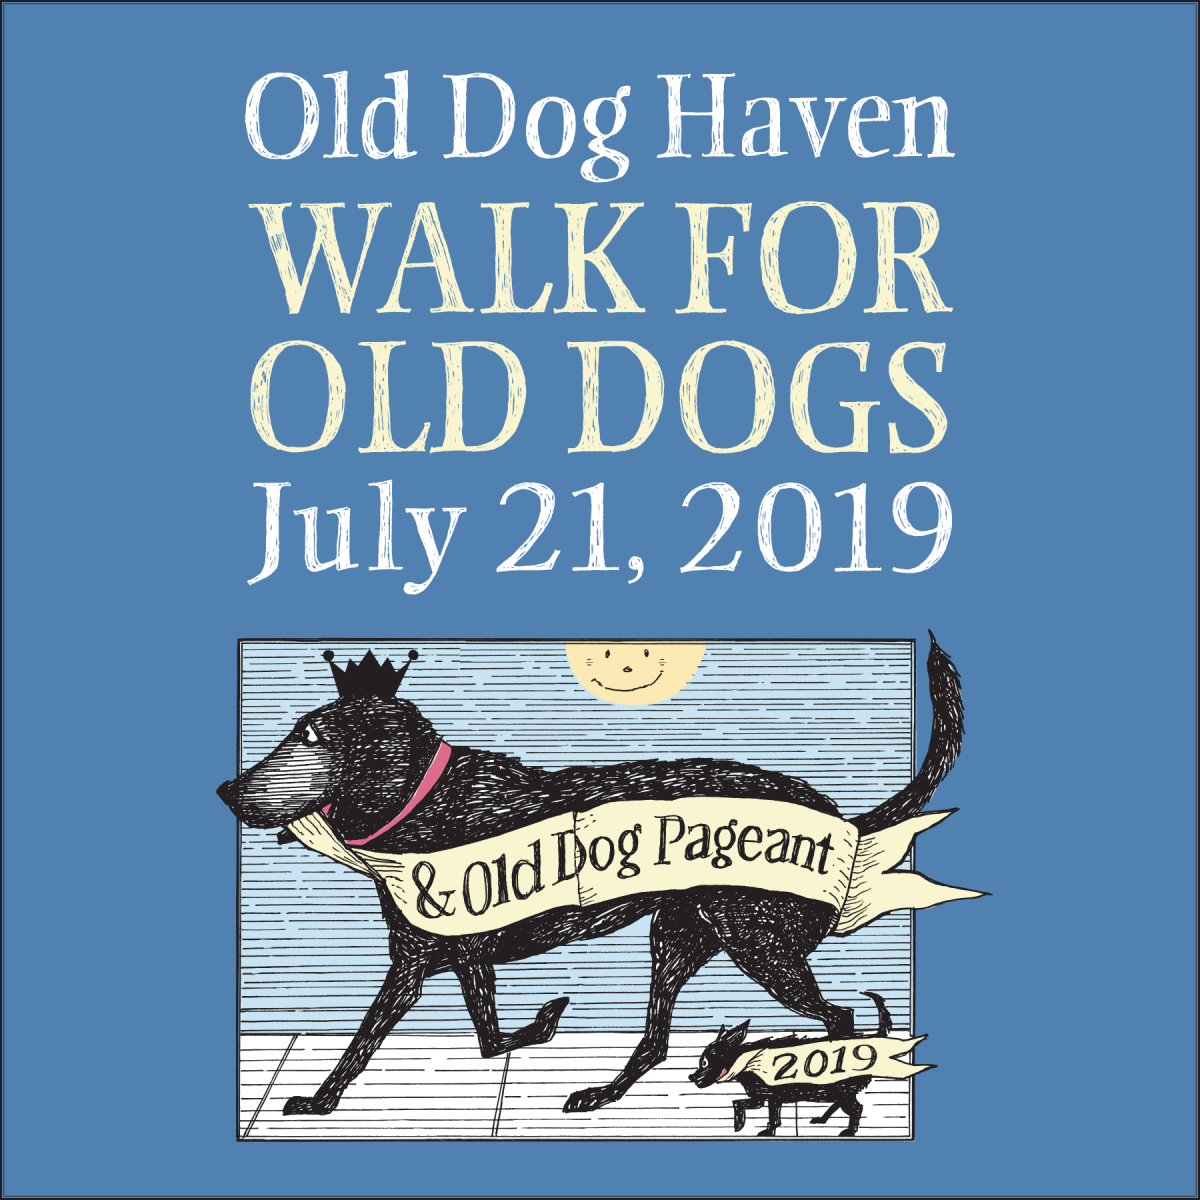 Old Dog Haven Walk for Old Dogs and Old Dog Pageant Seattle Area